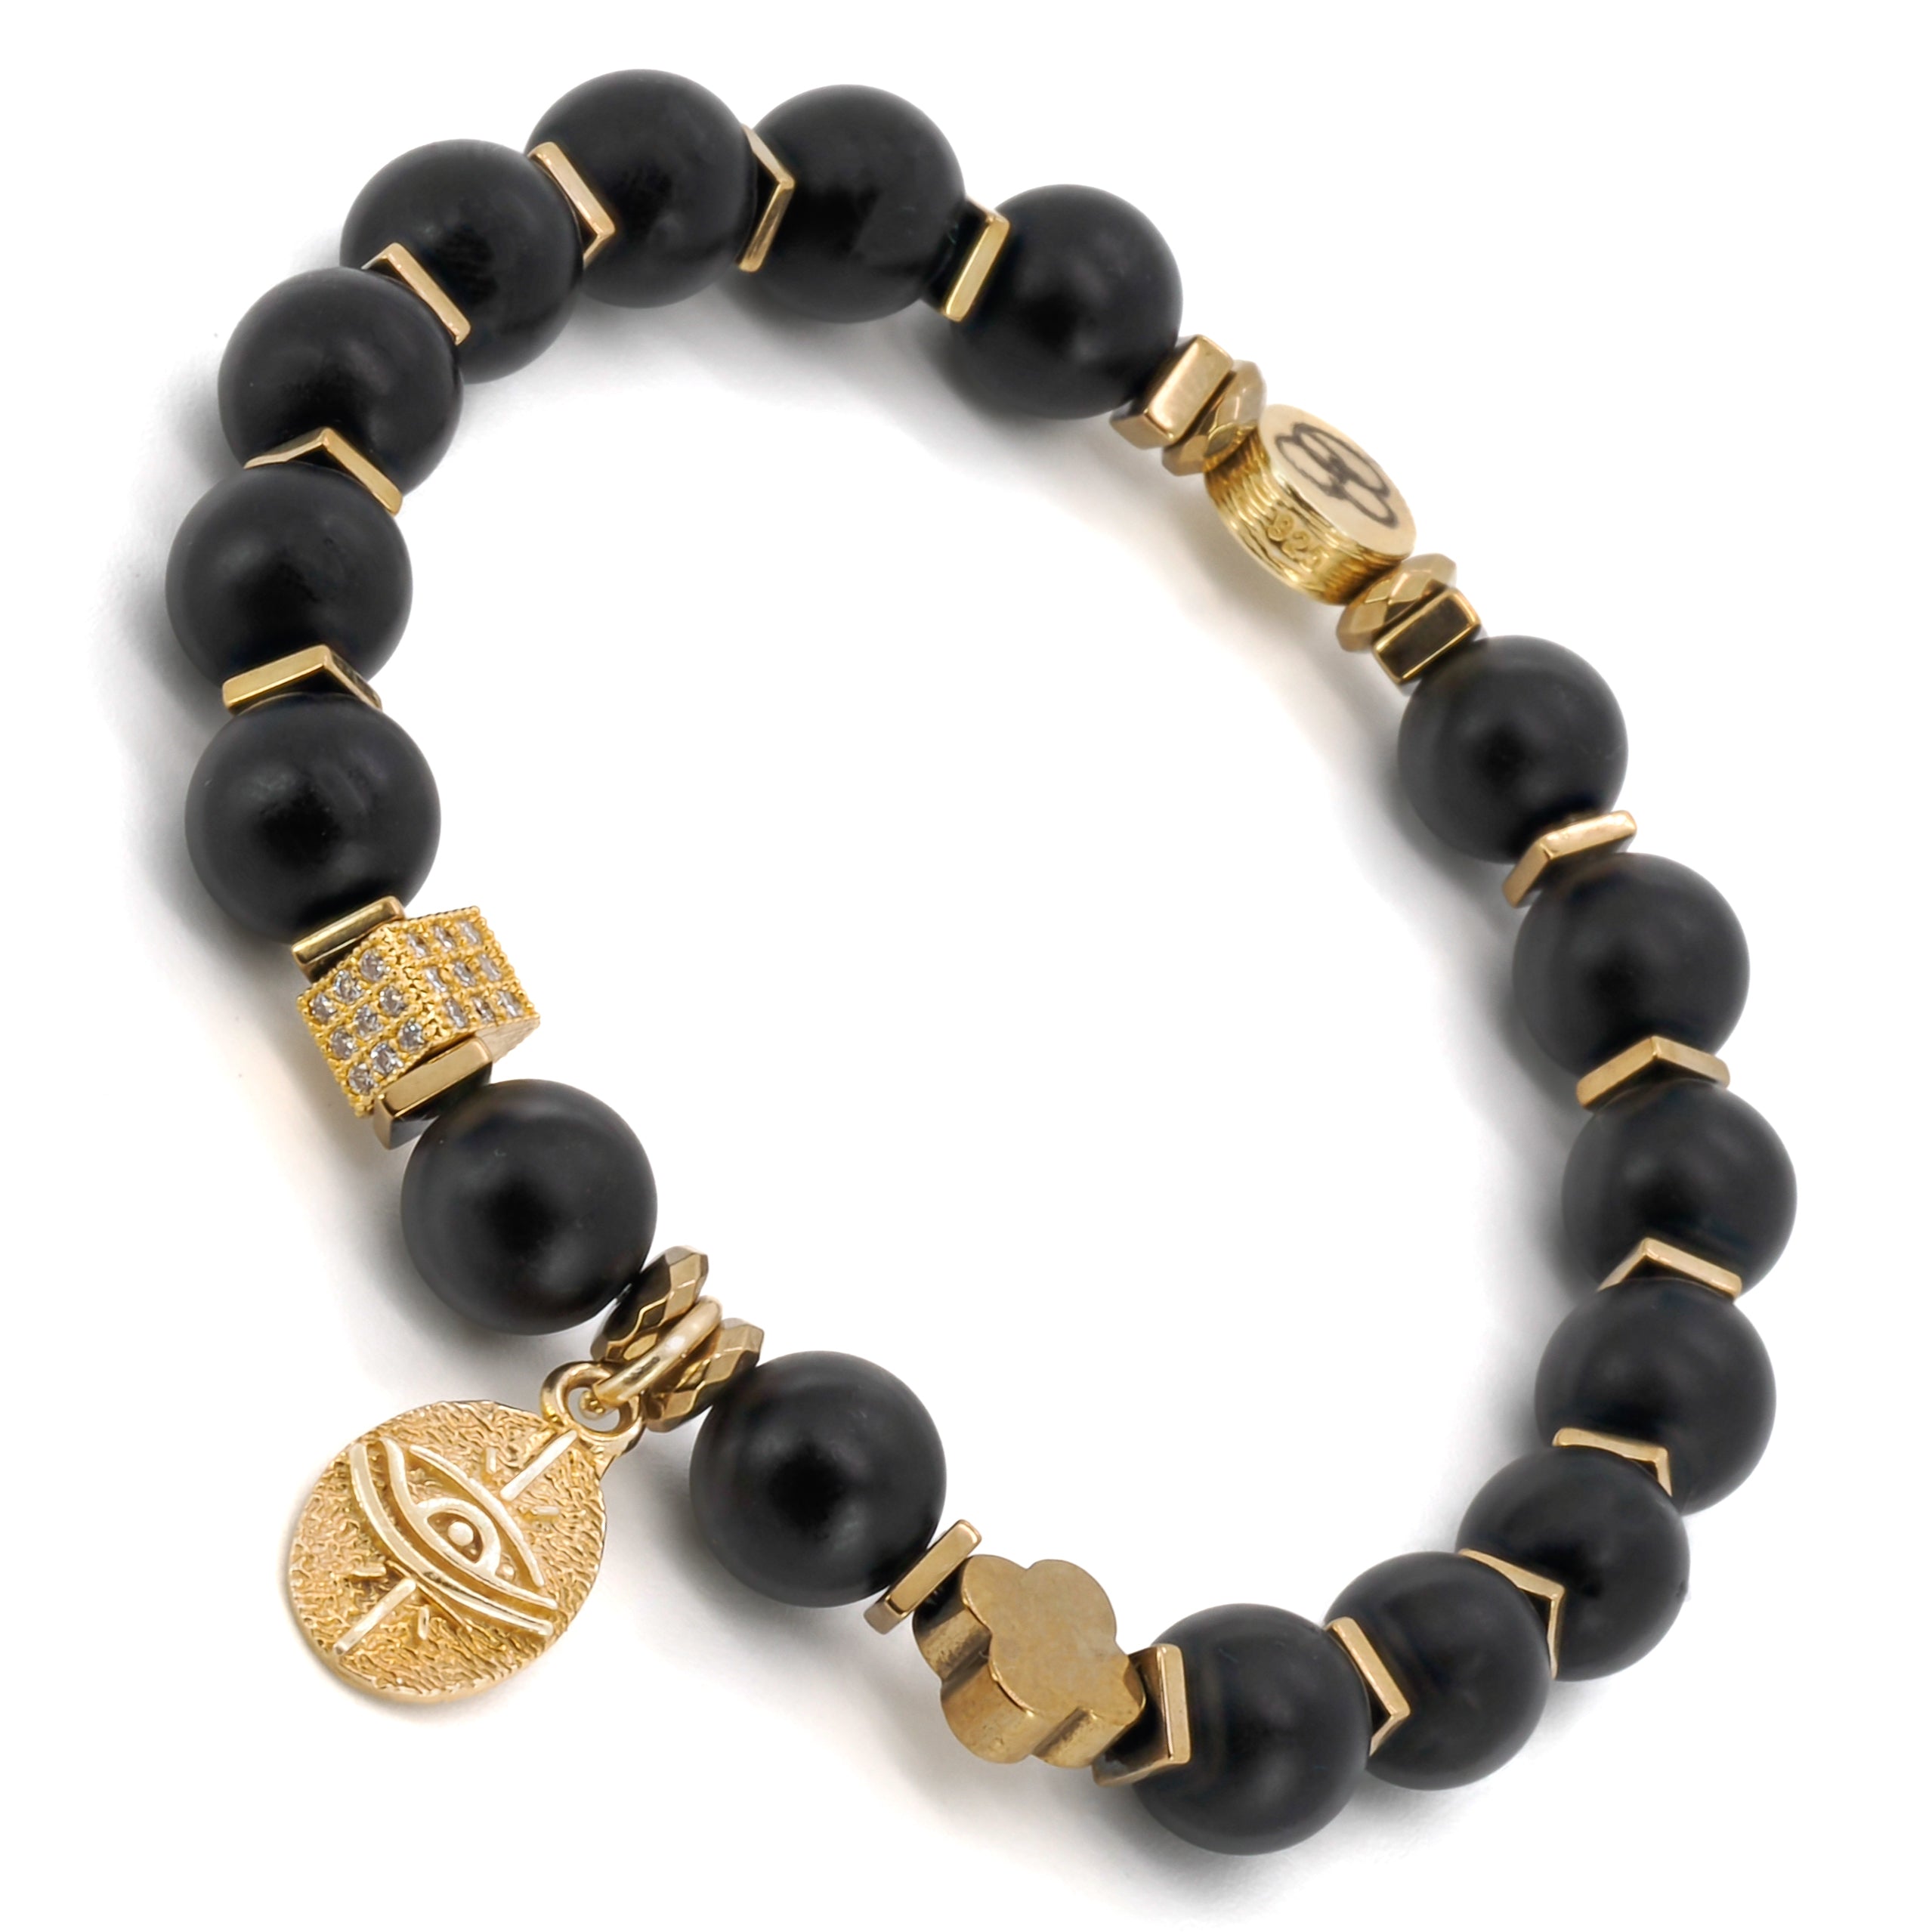 Elevate your style and embrace spiritual energy with the Onyx Unique Eye Bracelet, featuring a gold-plated evil eye charm.